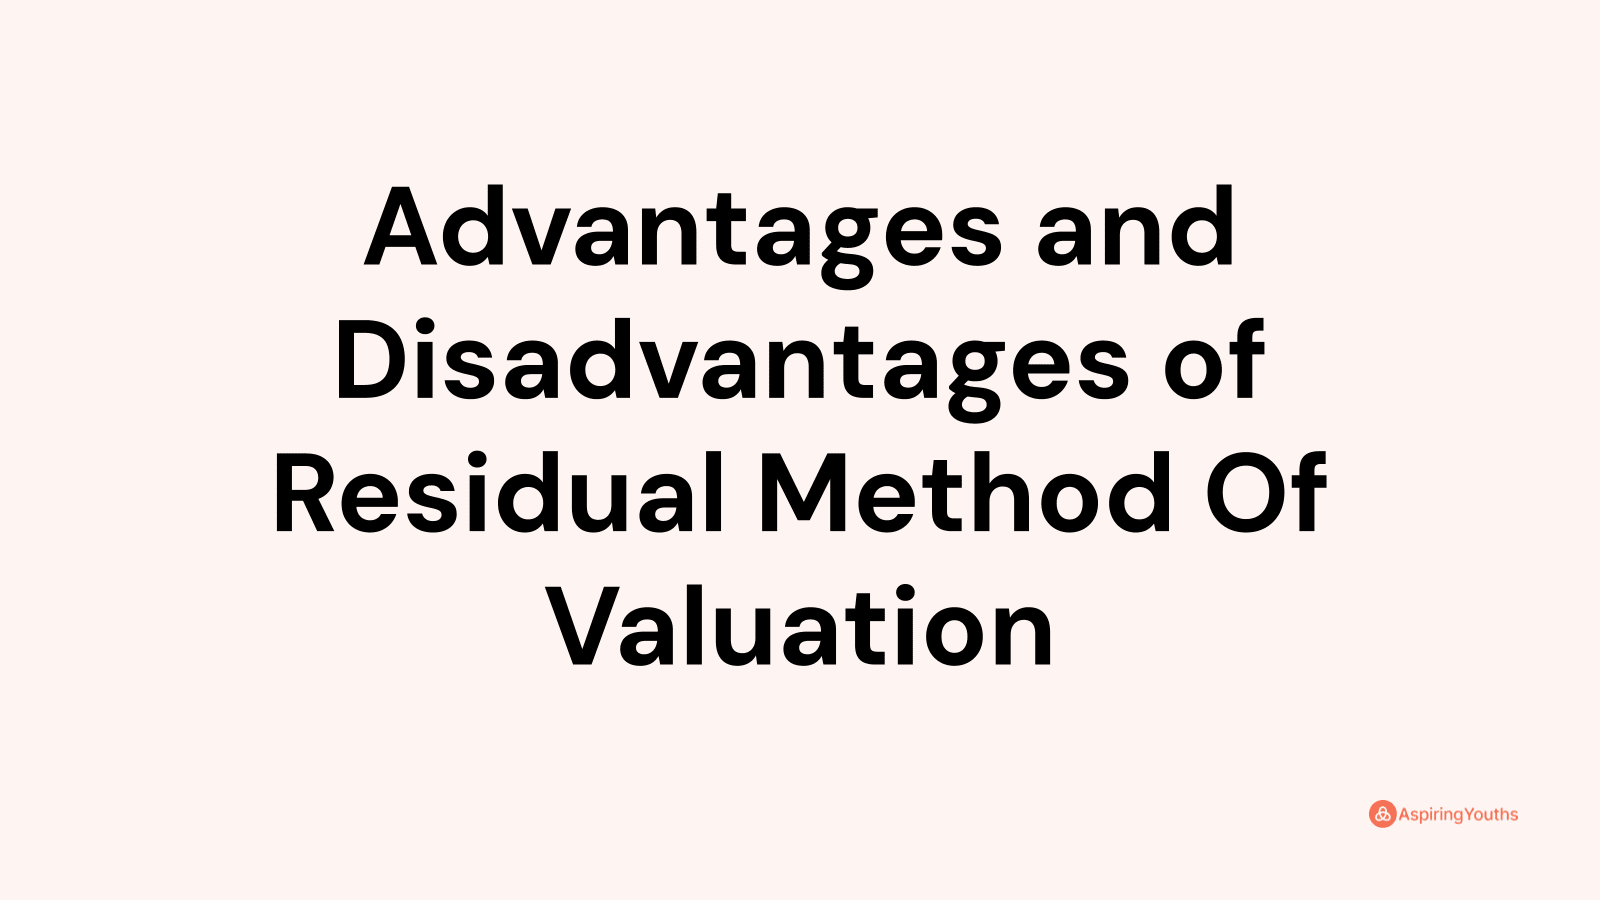 Advantages and disadvantages of Residual Method Of Valuation